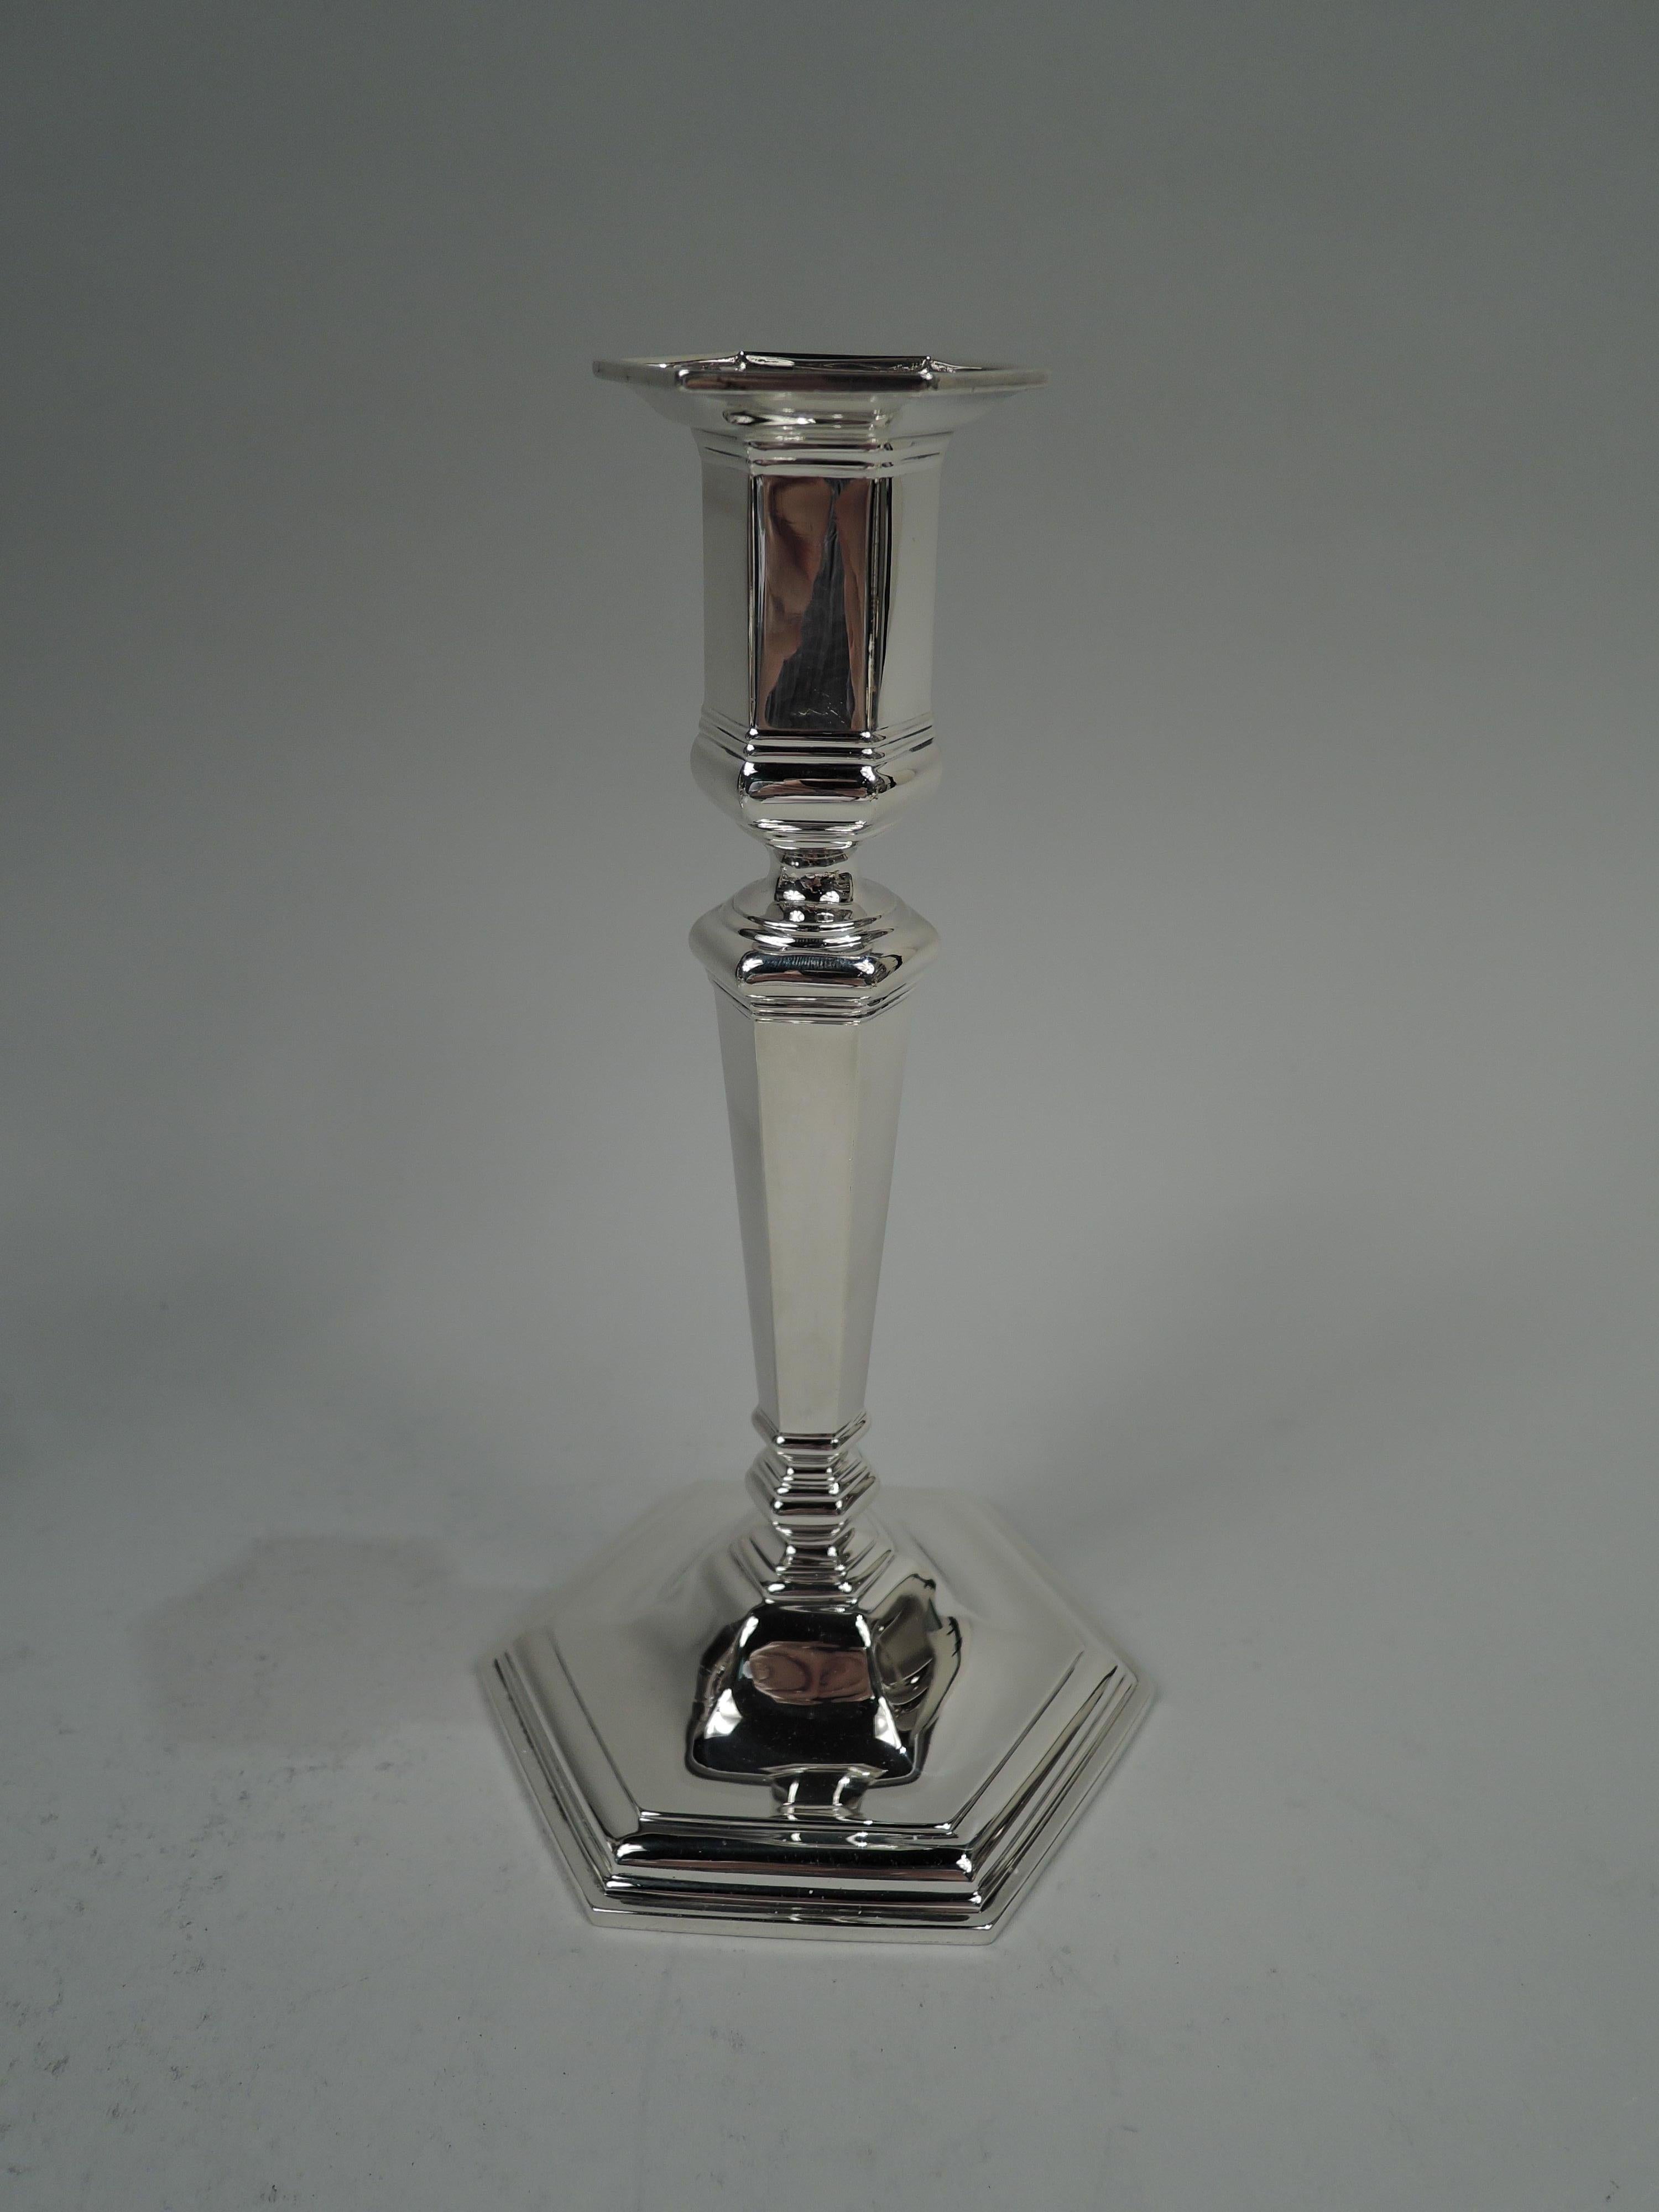 Pair of Edwardian Georgian sterling silver candlesticks. Made by Tiffany & Co. in New York, ca 1915. Each: Tapering shaft with base knop on stepped and raised foot. Socket has straight sides bellied bottom. Faceted. Fully marked including maker’s